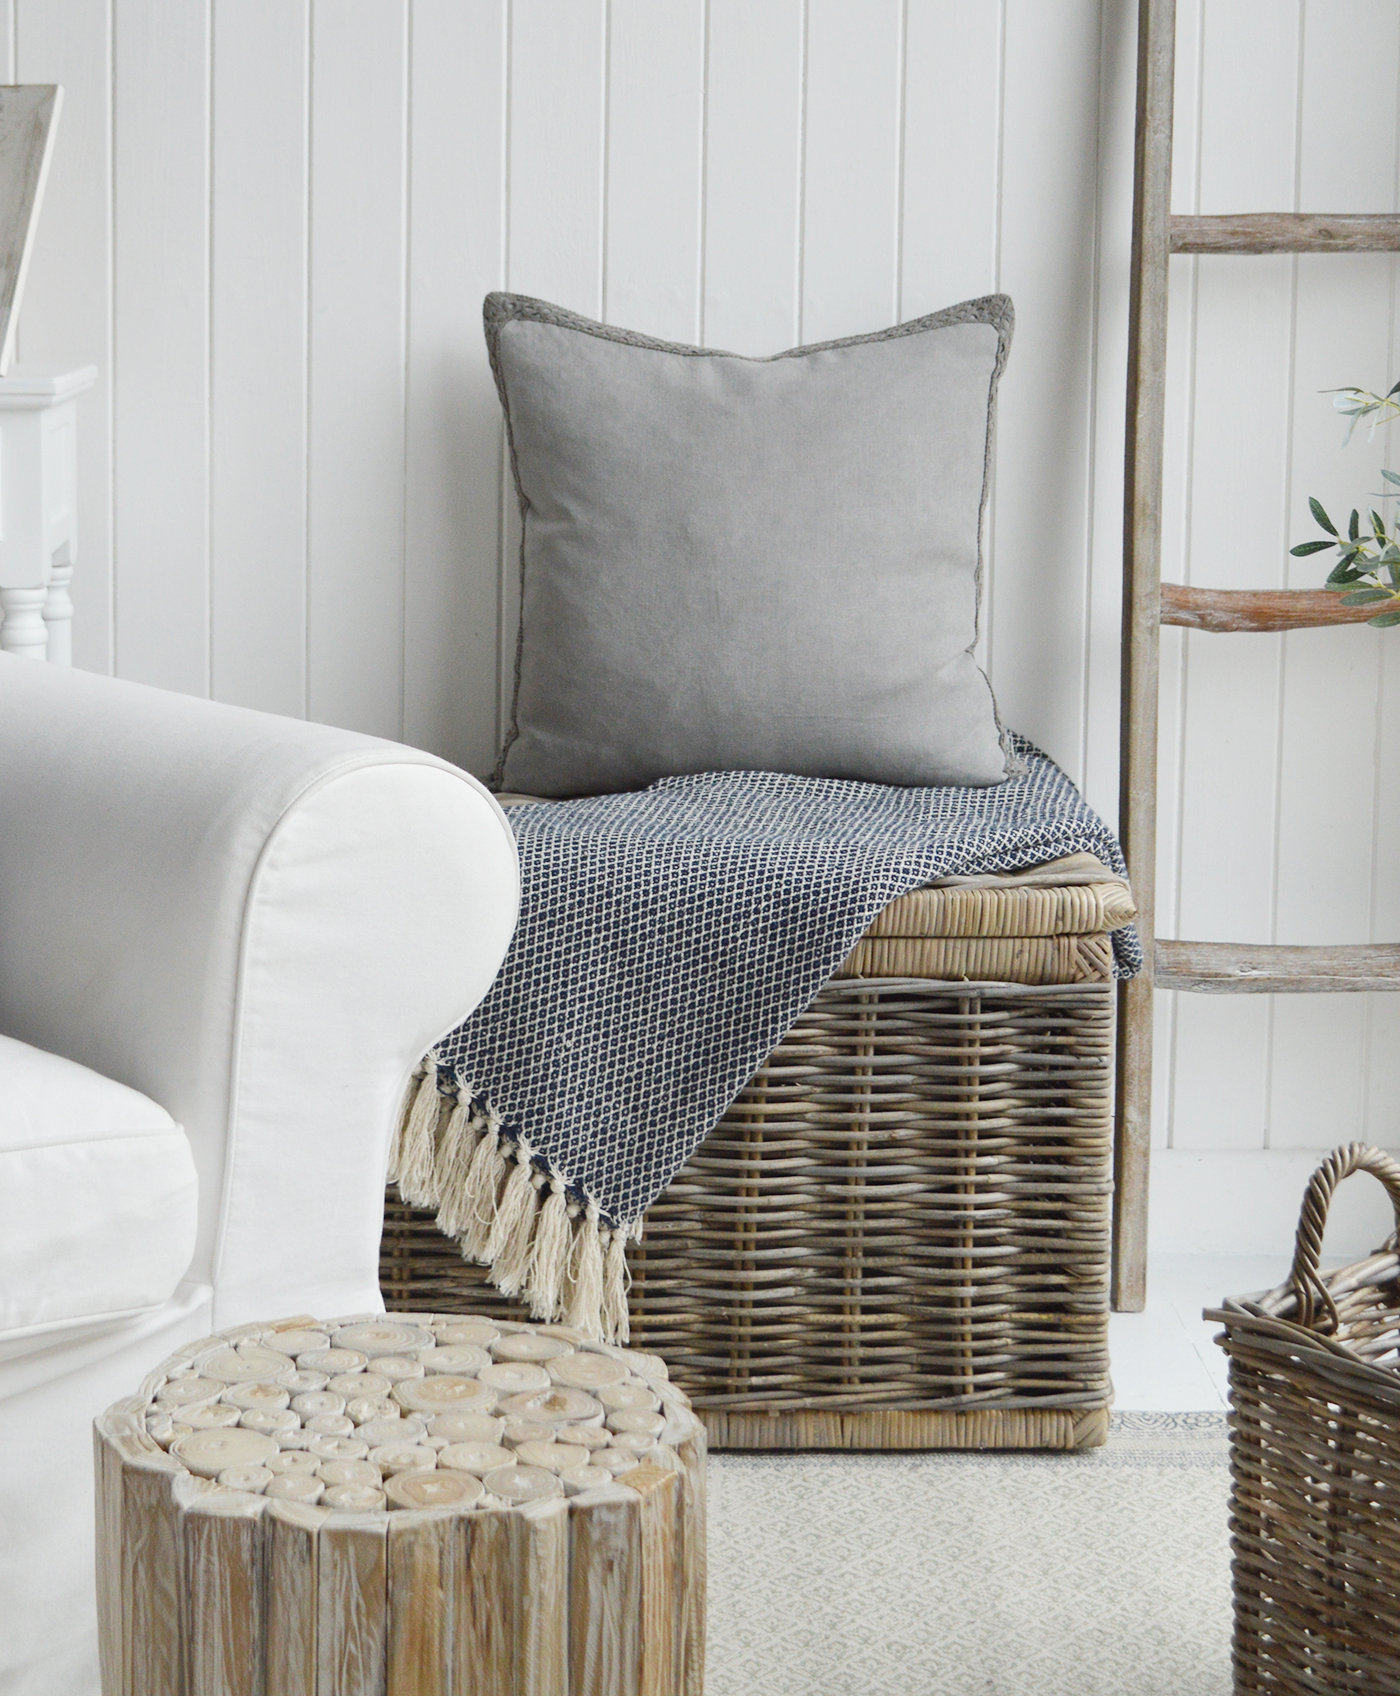 New England Style Country, Coastal and White Furniture and accessories for the home. Richmond grey 100% stonewashed Linen Feather Filled Cushion